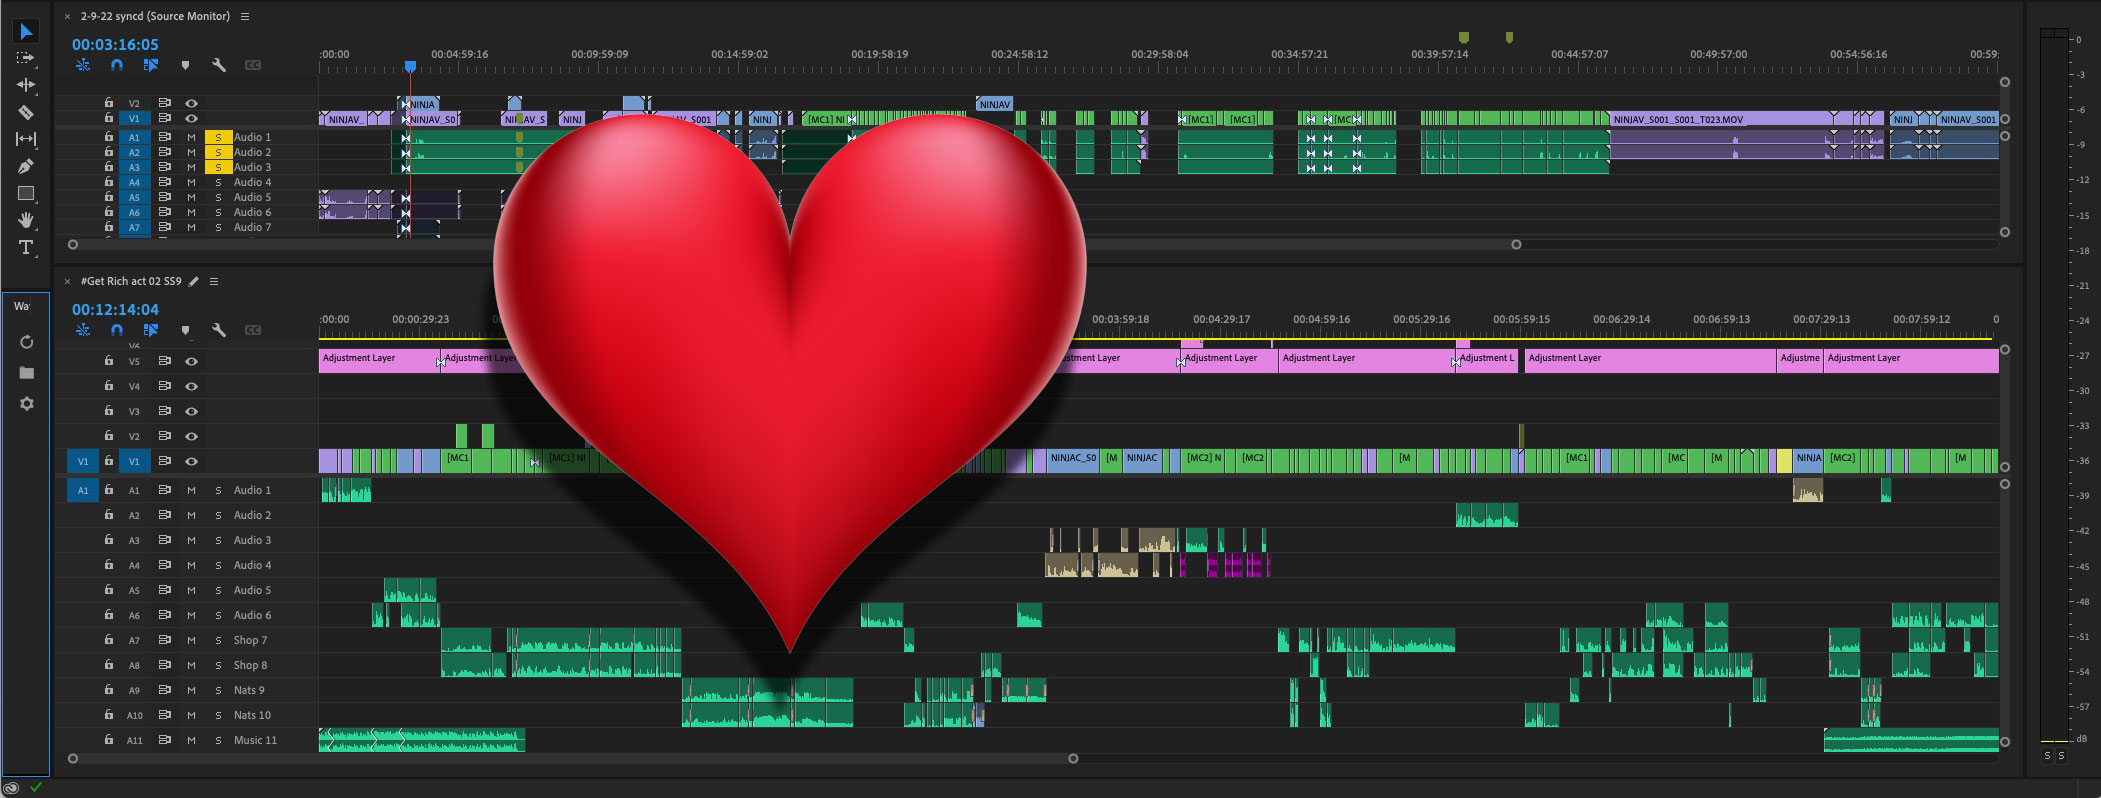 My single most loved feature in Adobe Premiere Pro 5